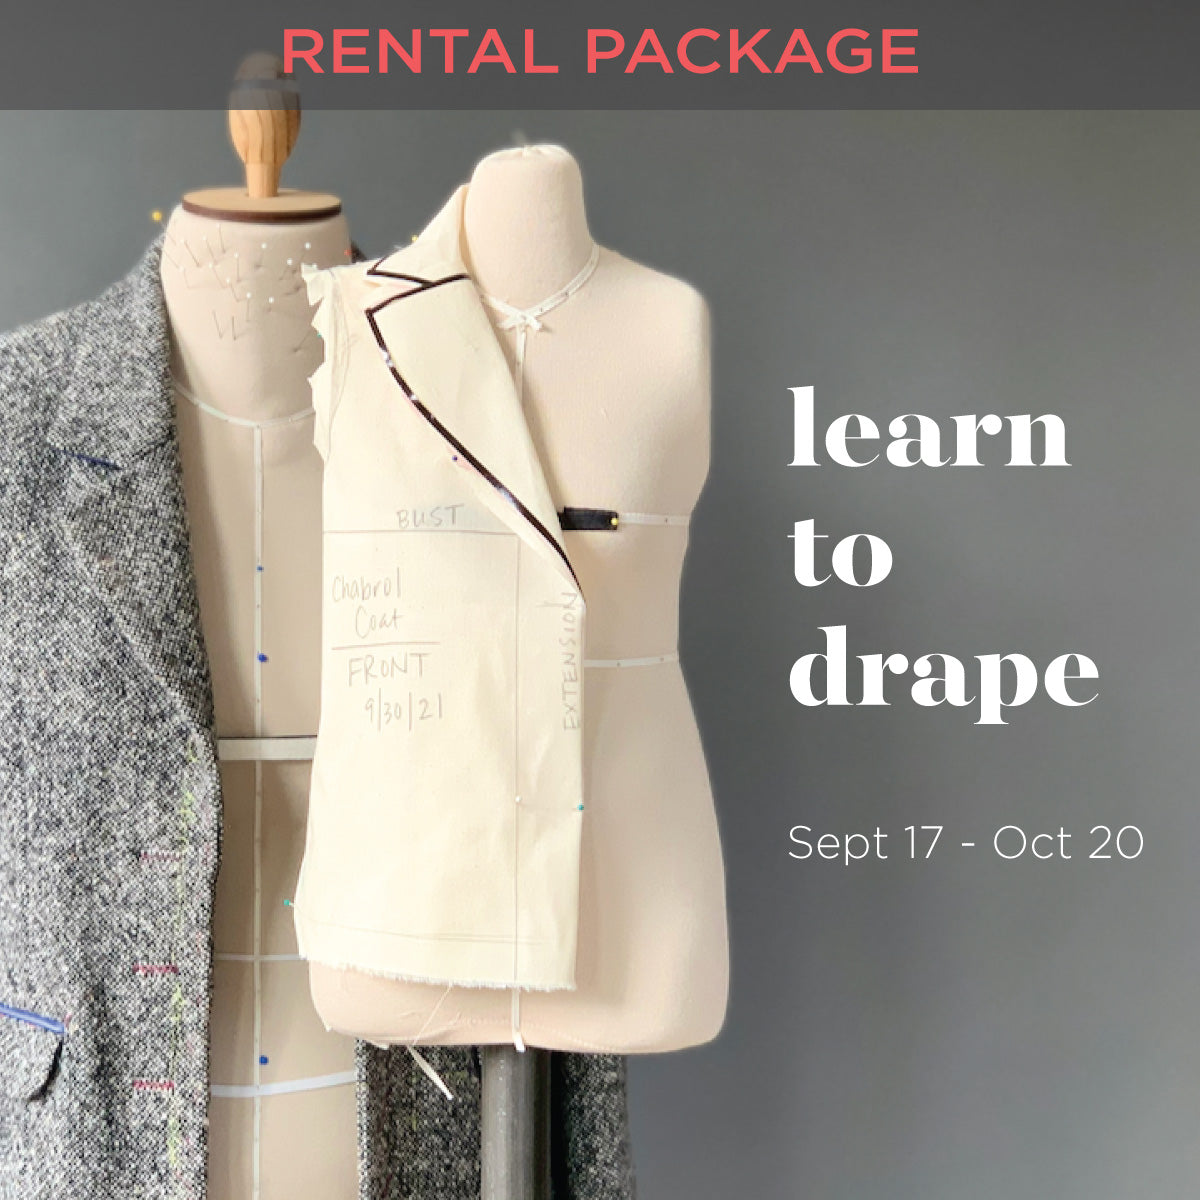 Learn to Drape 9/17- 10/20 + half-scale rental package (FREE shipping)